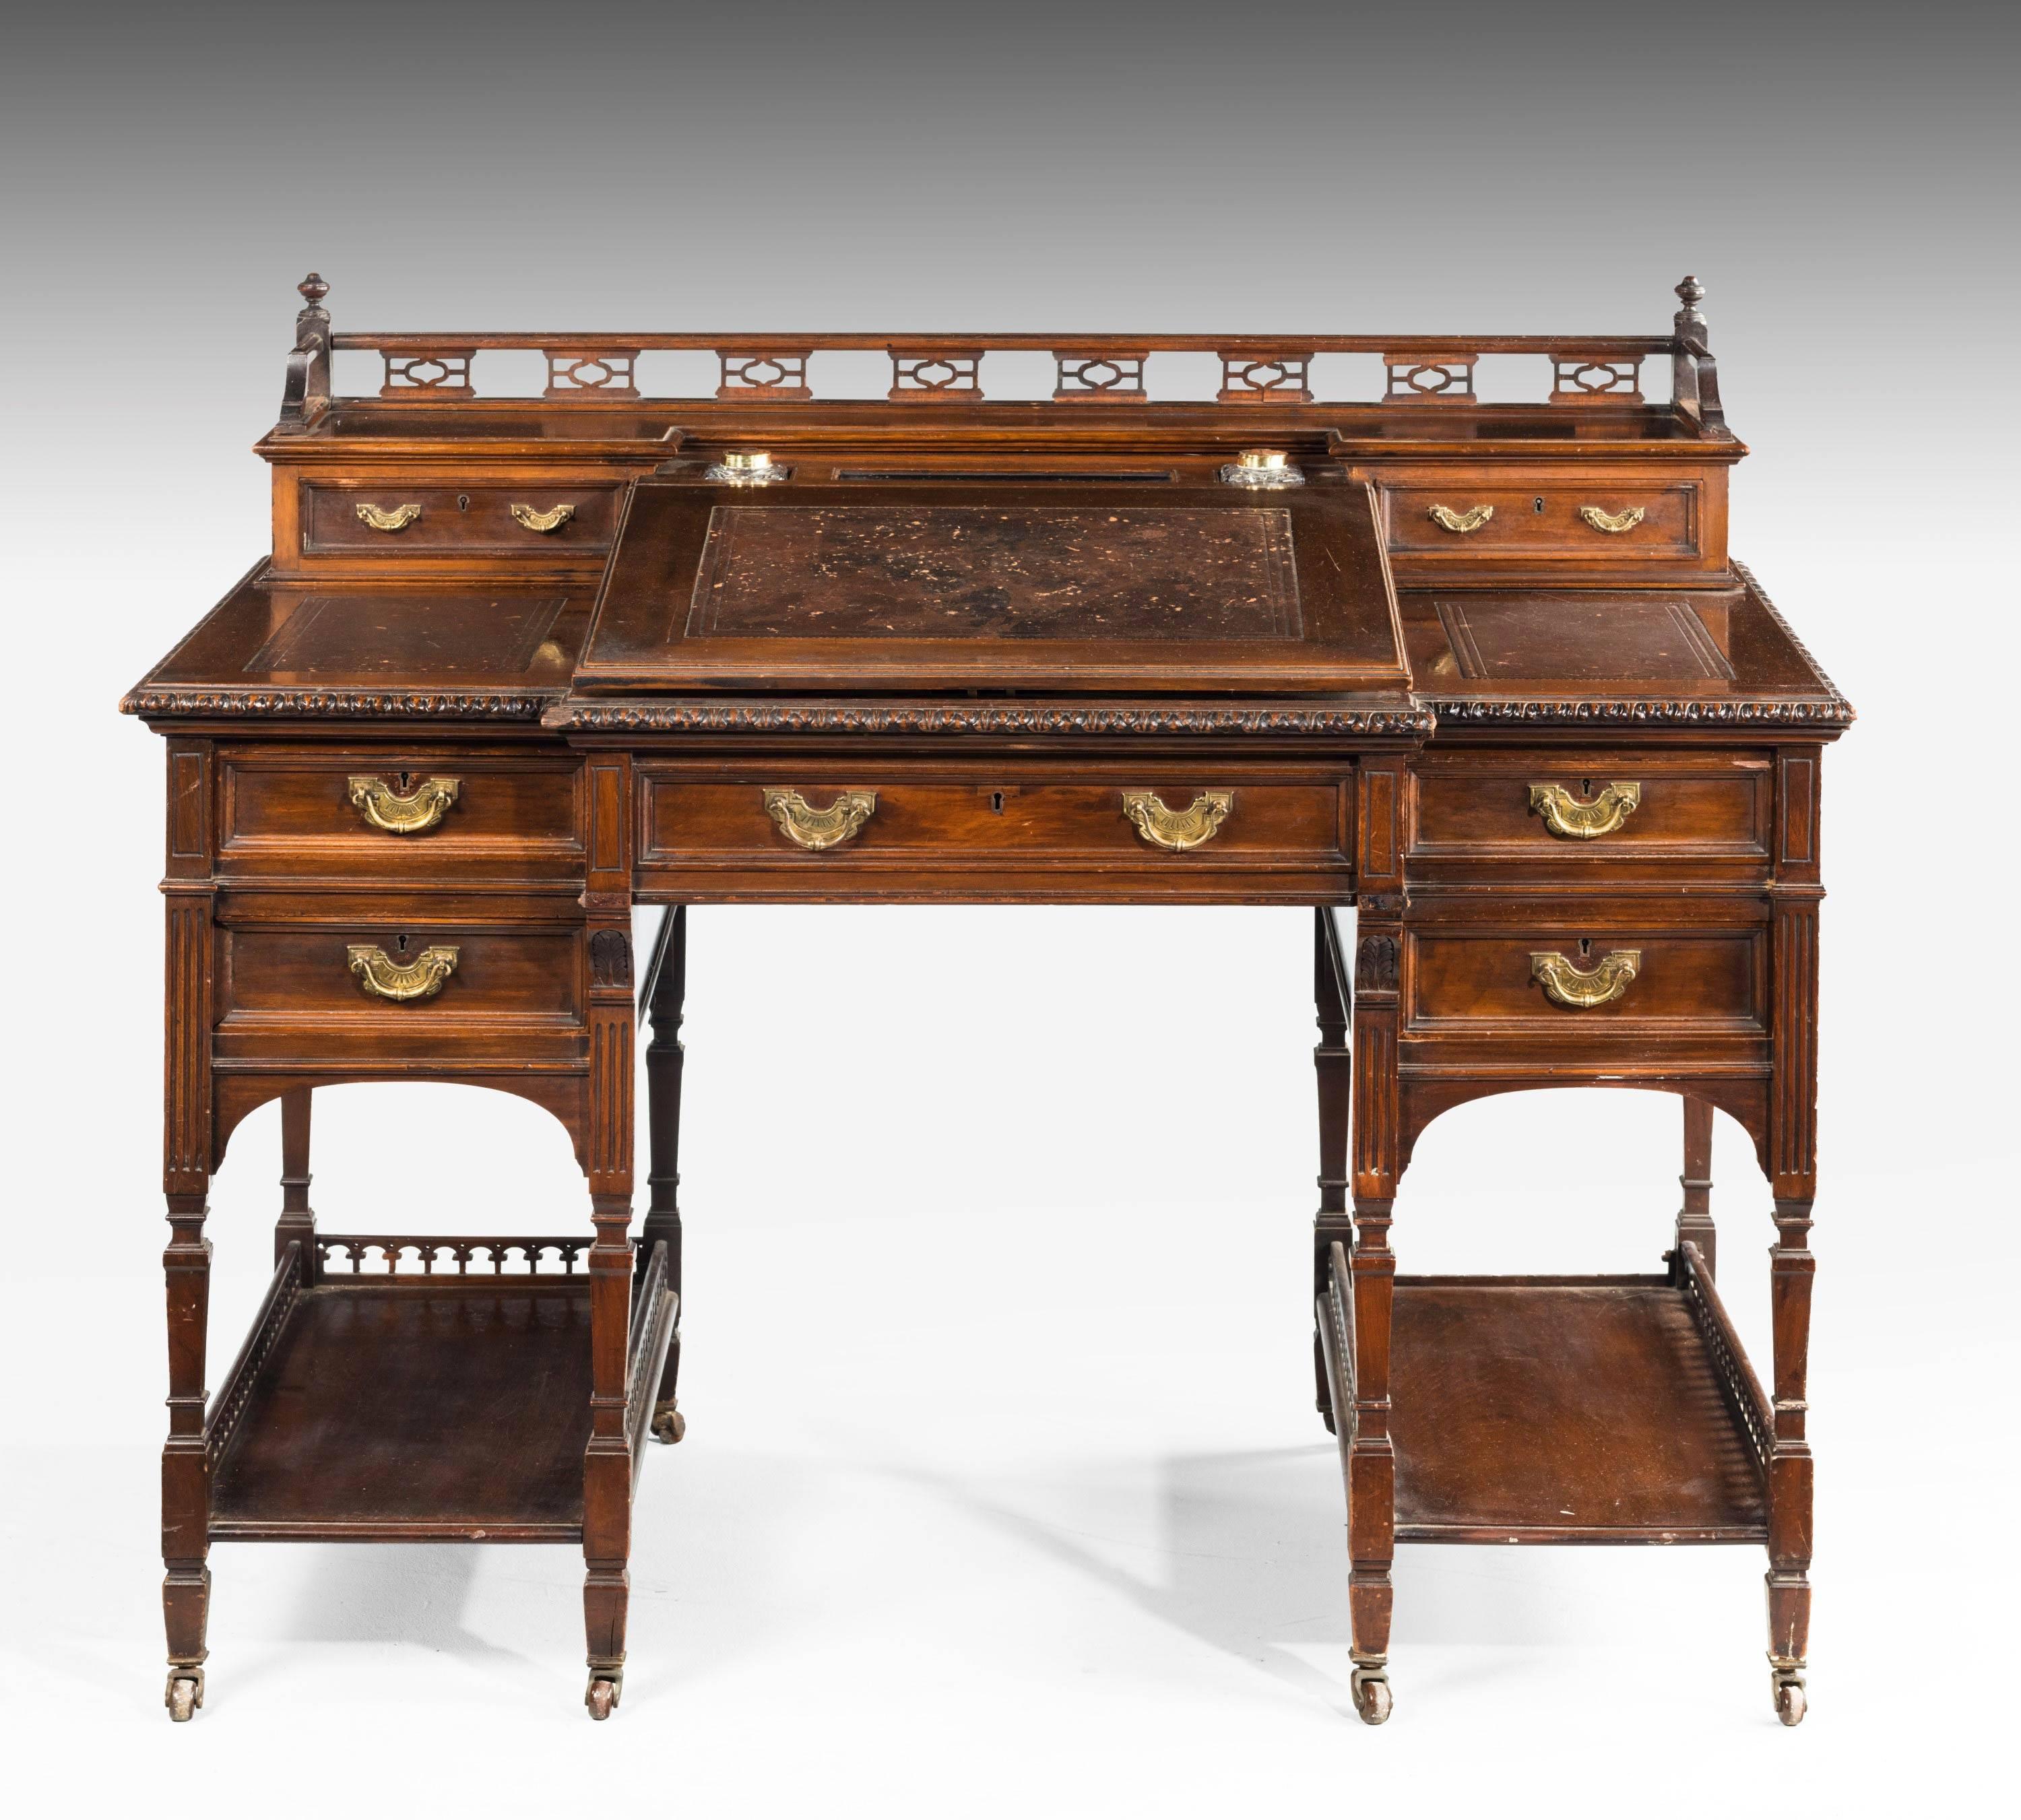 A good late 19th century mahogany desk with a well pierced gallery with fitted inkwells to the upper section. The lifting slope interior with fitted birch drawers and Pidgeon holes.